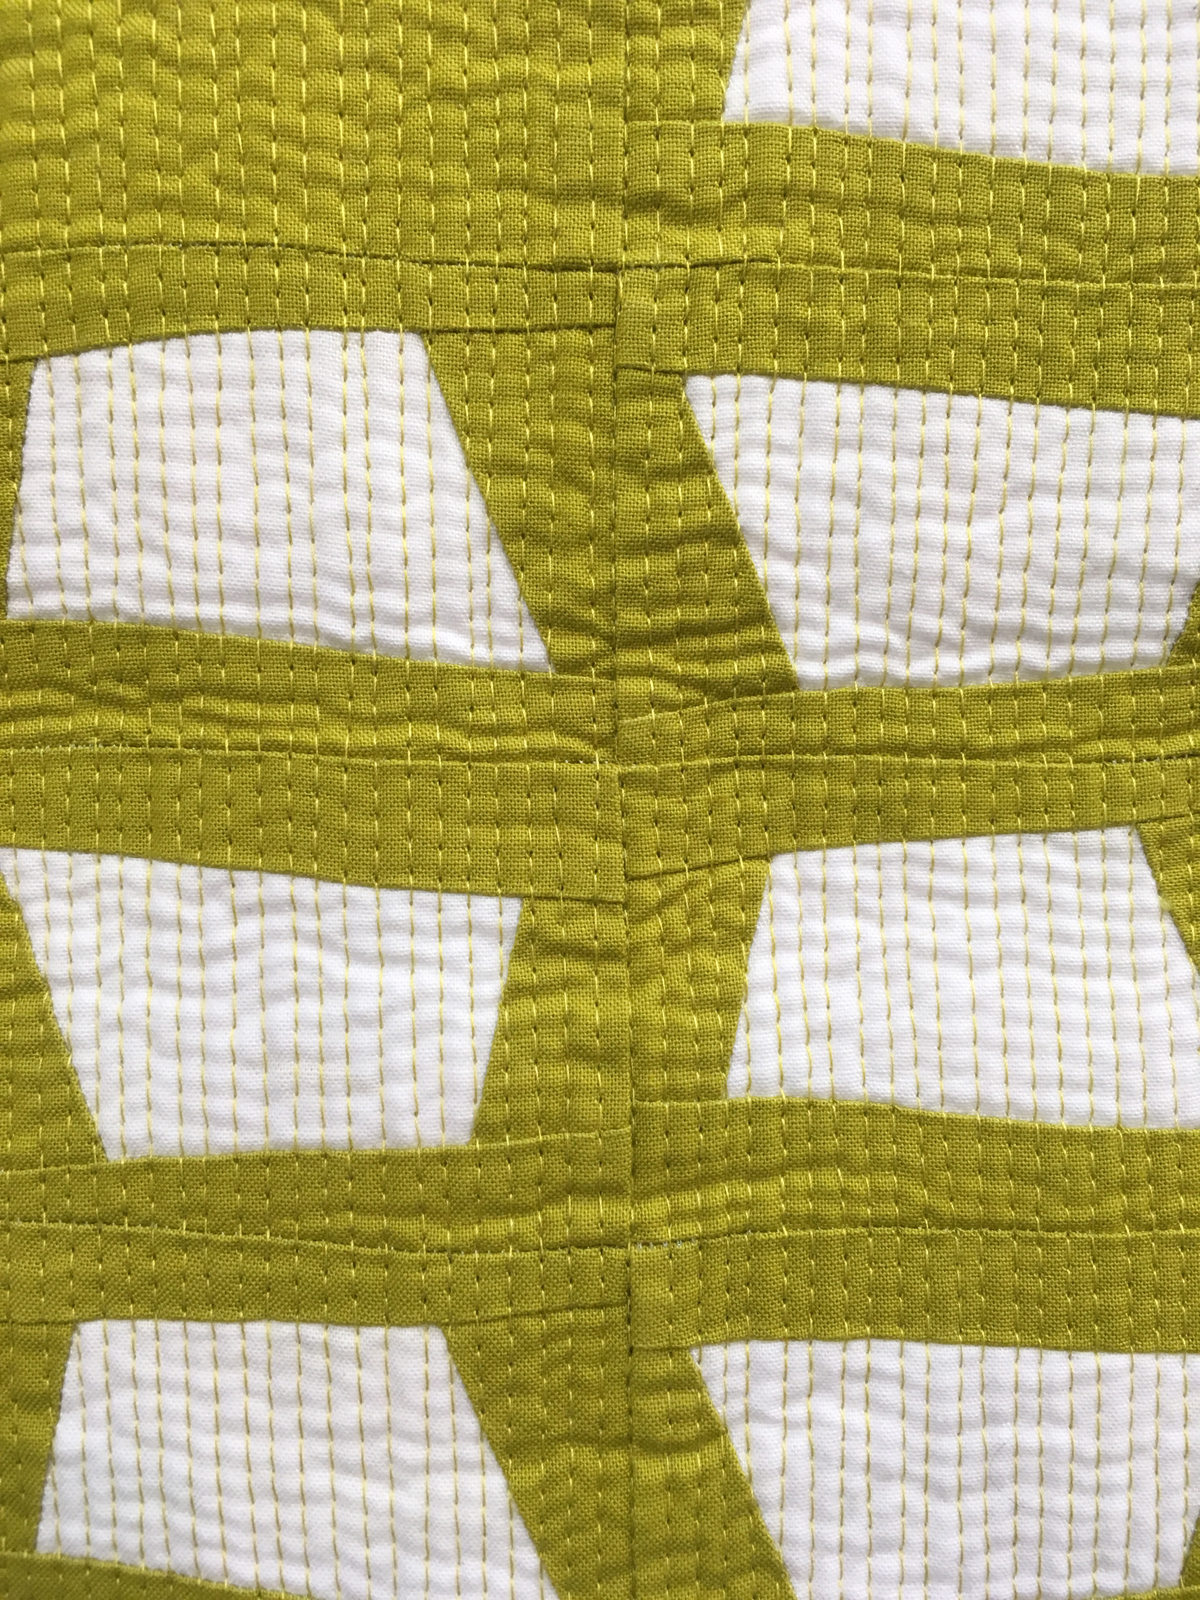 15 of my favorite modern quilts (with descriptions from the makers